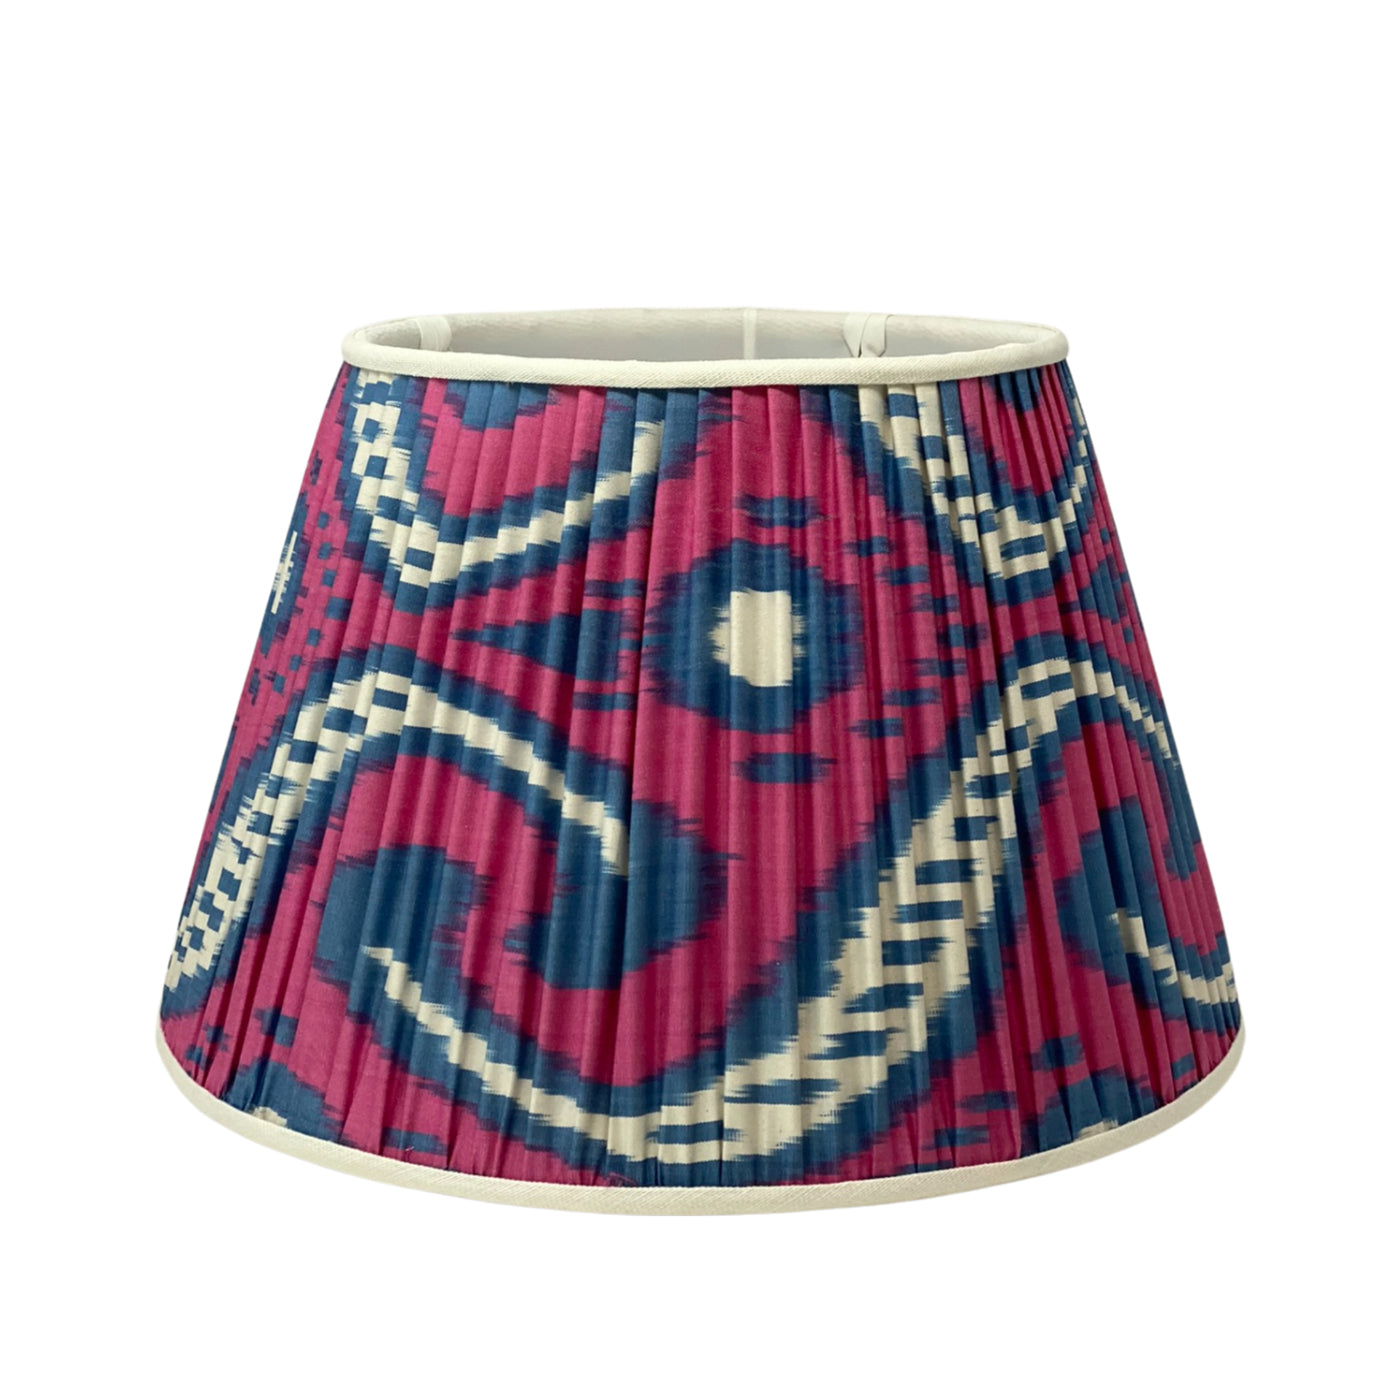 Pink and Blue Ikat Lampshade with white trim